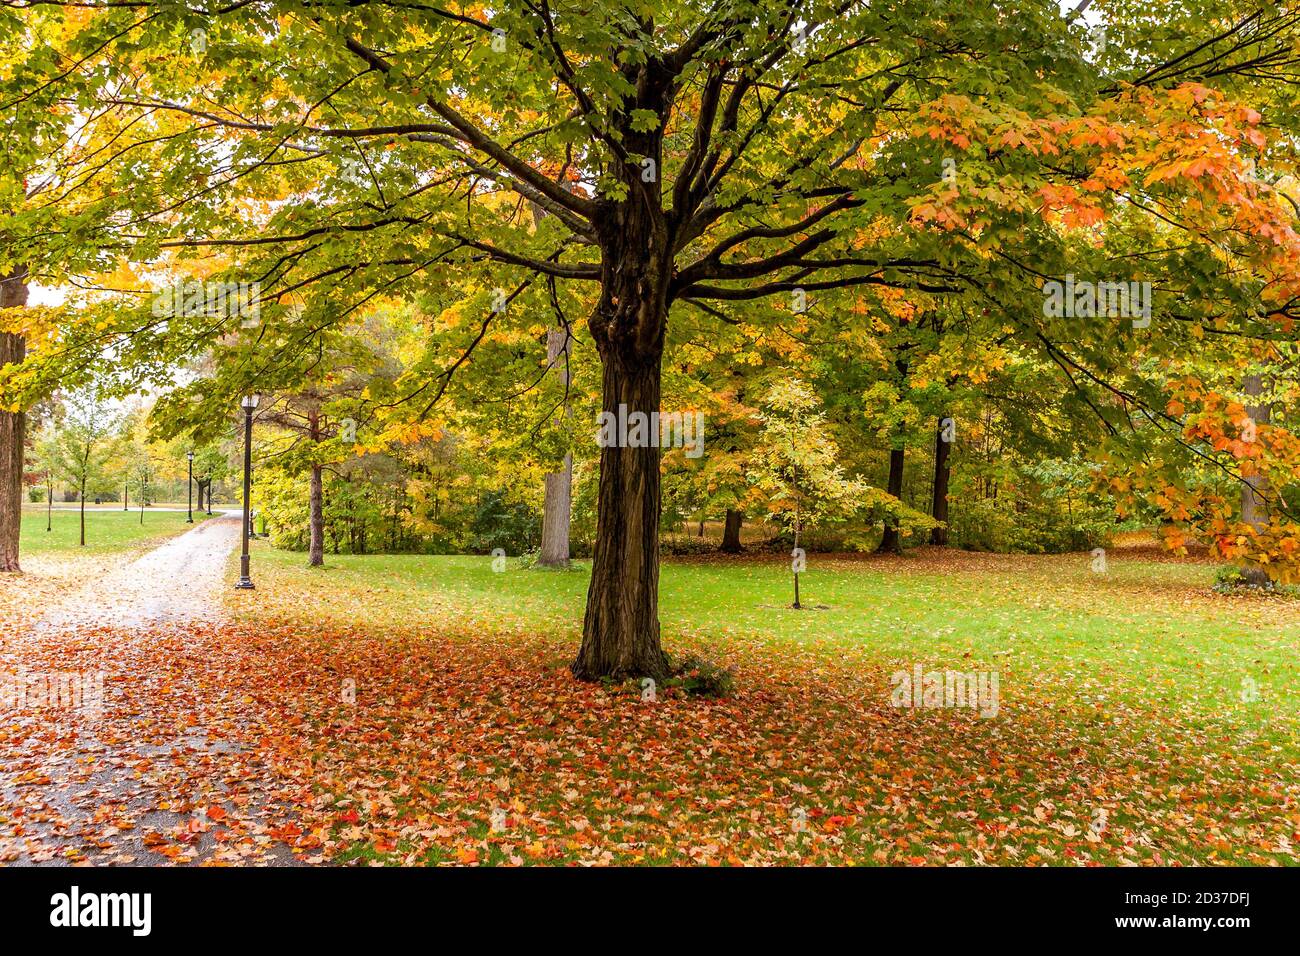 A beautiful maple tree resplendent with the colors of autumn overlooking a path. Stock Photo